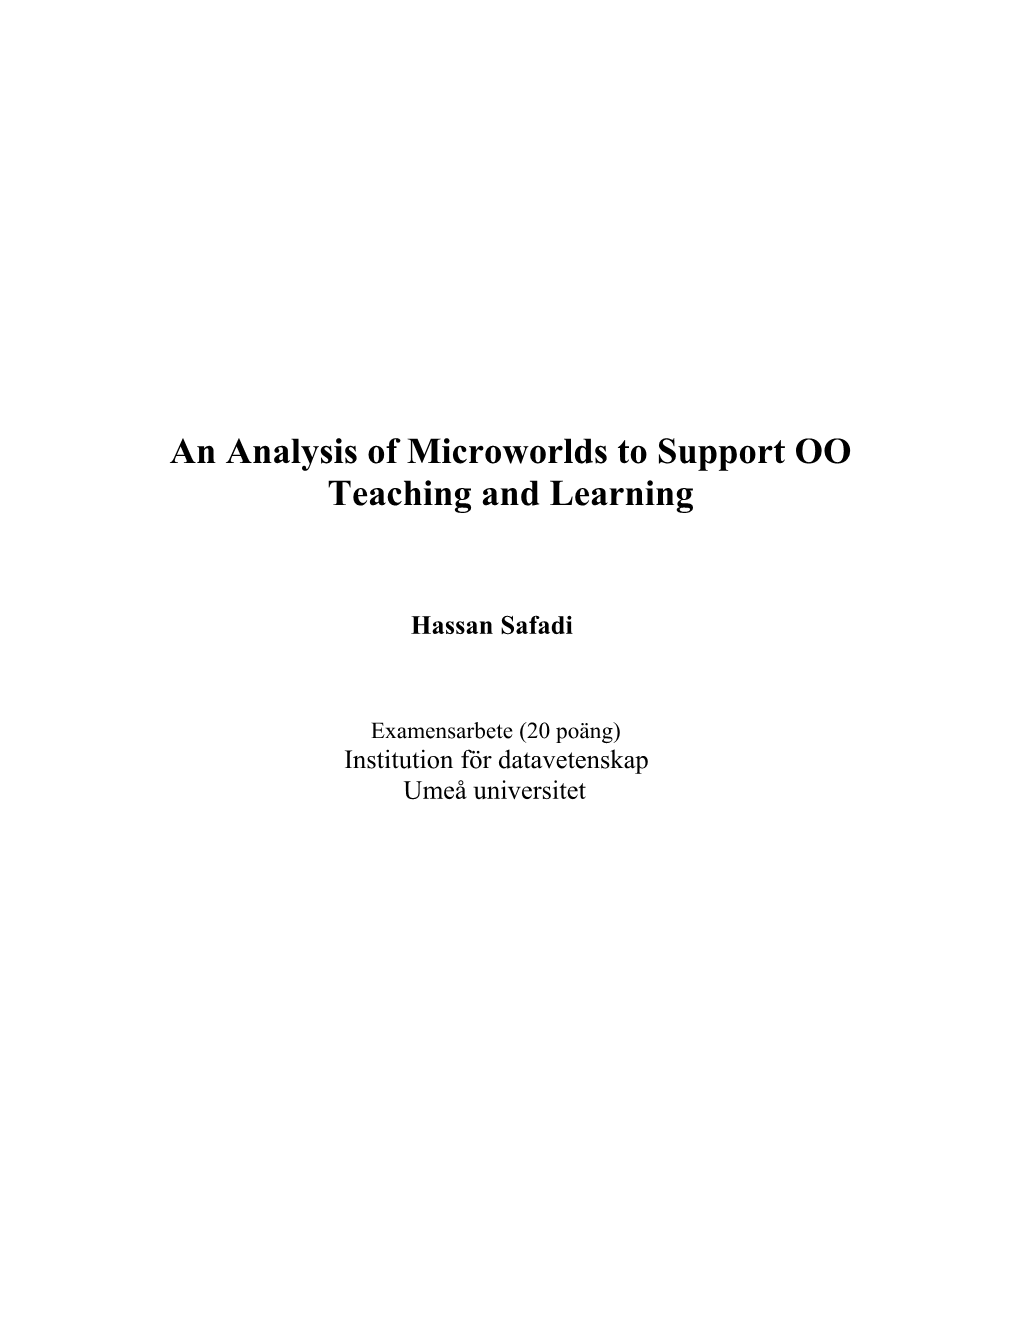 An Analysis of Microworlds to Support OO Teaching and Learning